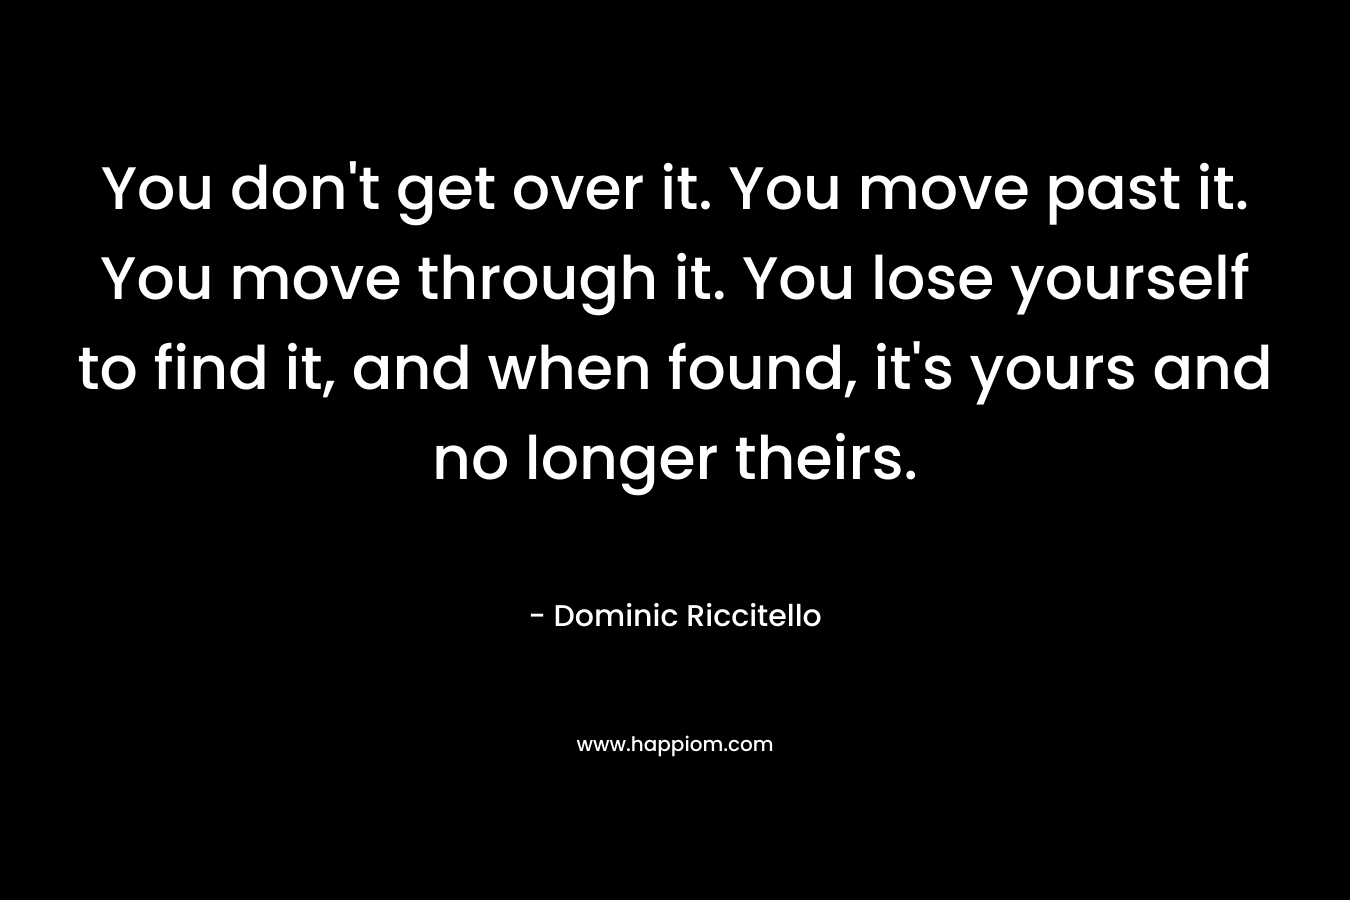 You don't get over it. You move past it. You move through it. You lose yourself to find it, and when found, it's yours and no longer theirs.